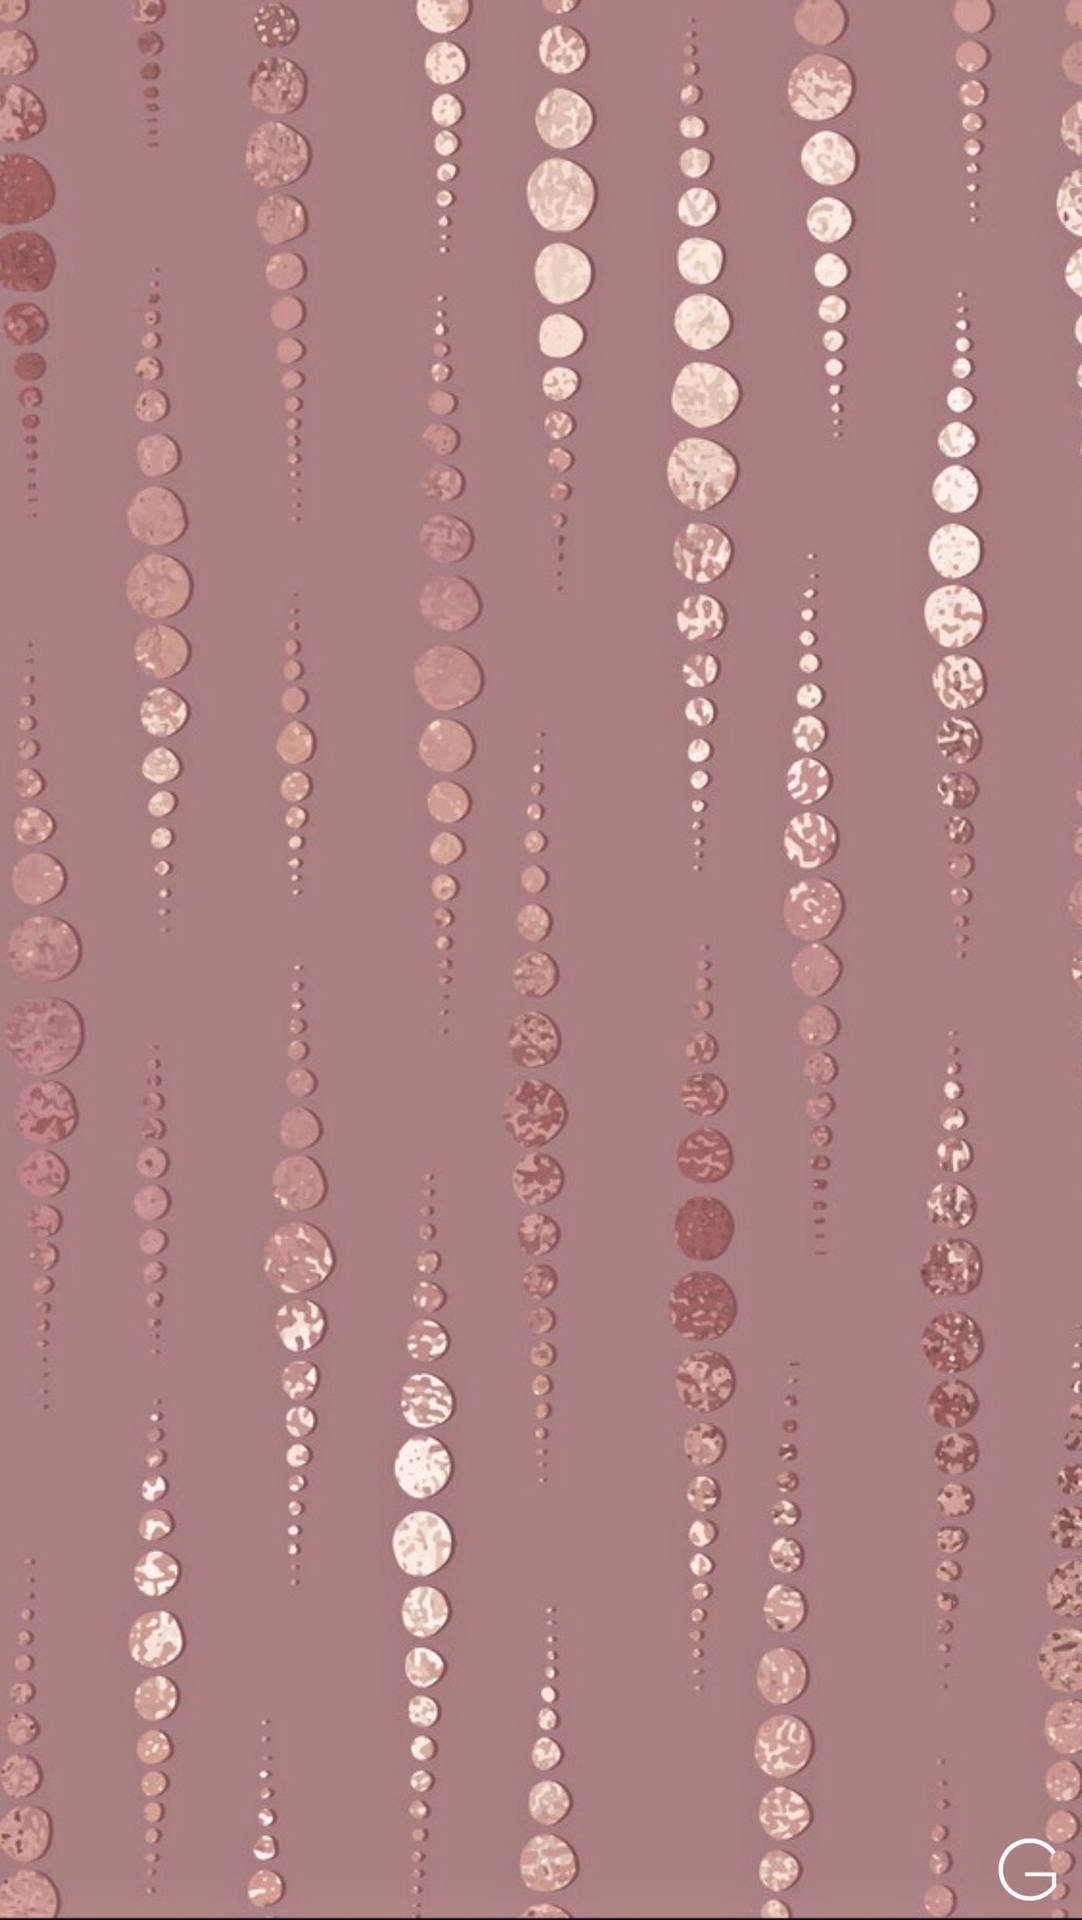 Dotted Pattern Rose Gold Iphone Background